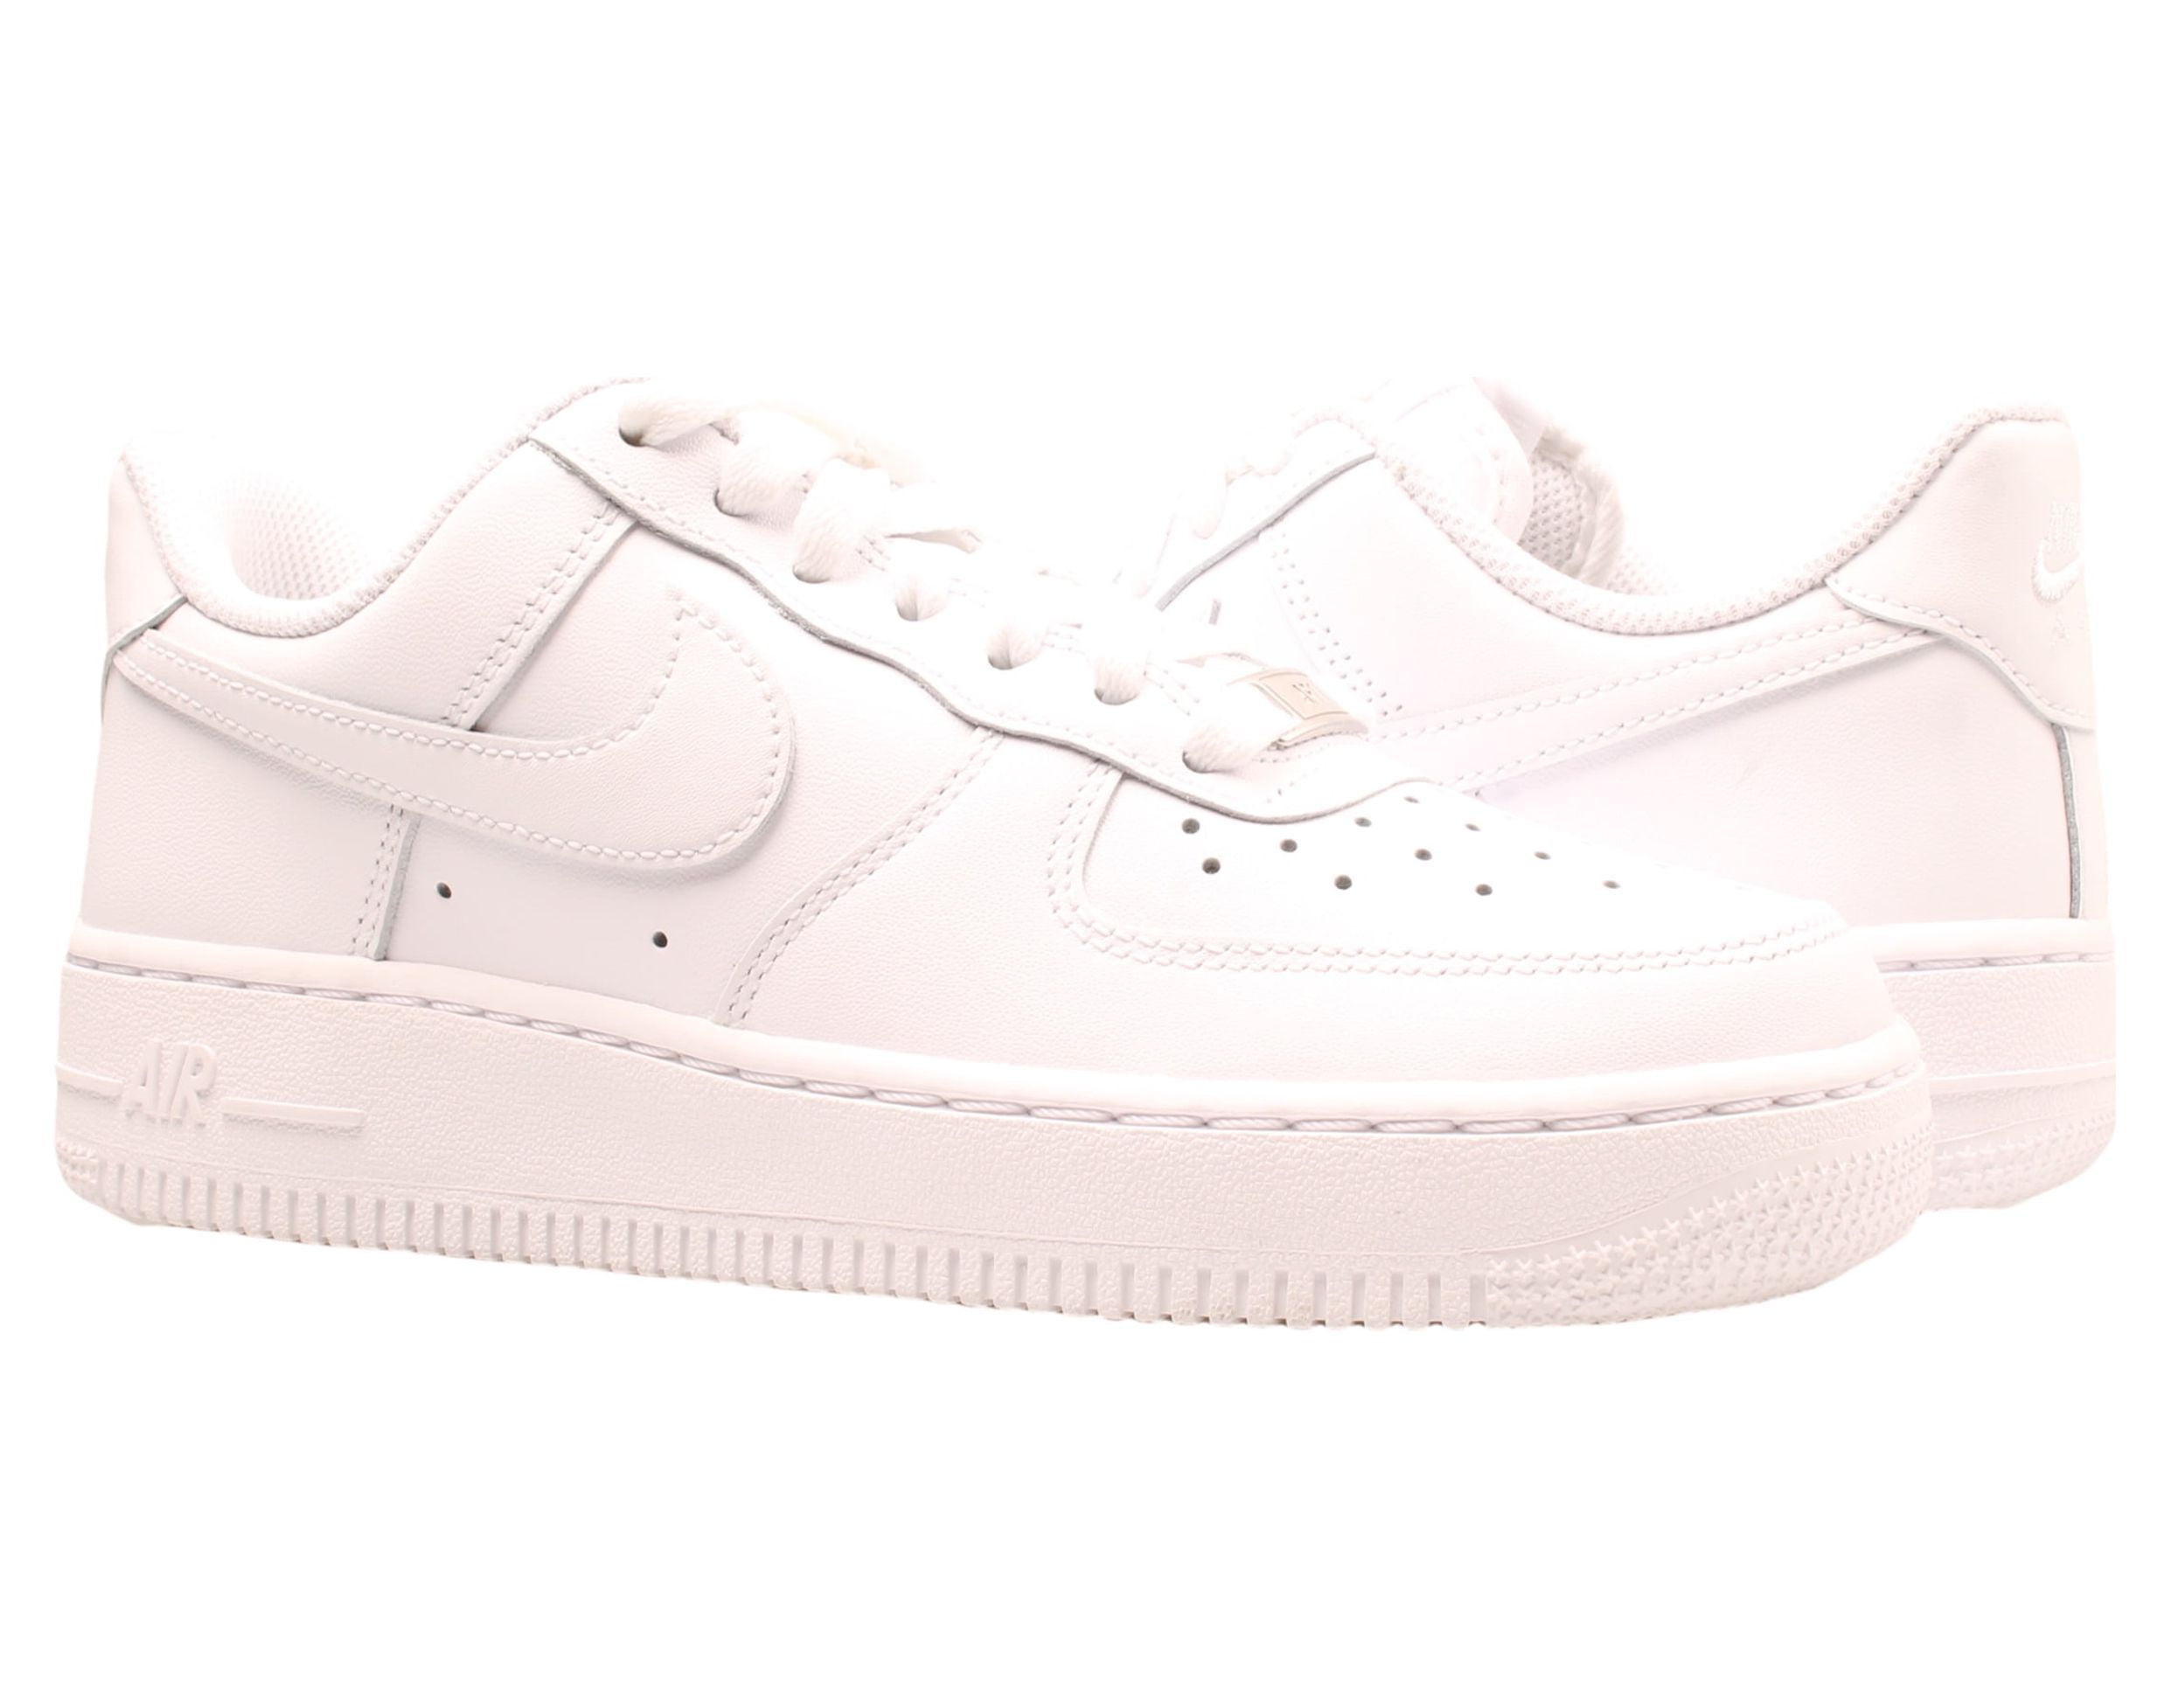 Nike Air Force 1 07 Women's Basketball Shoes 7.5 